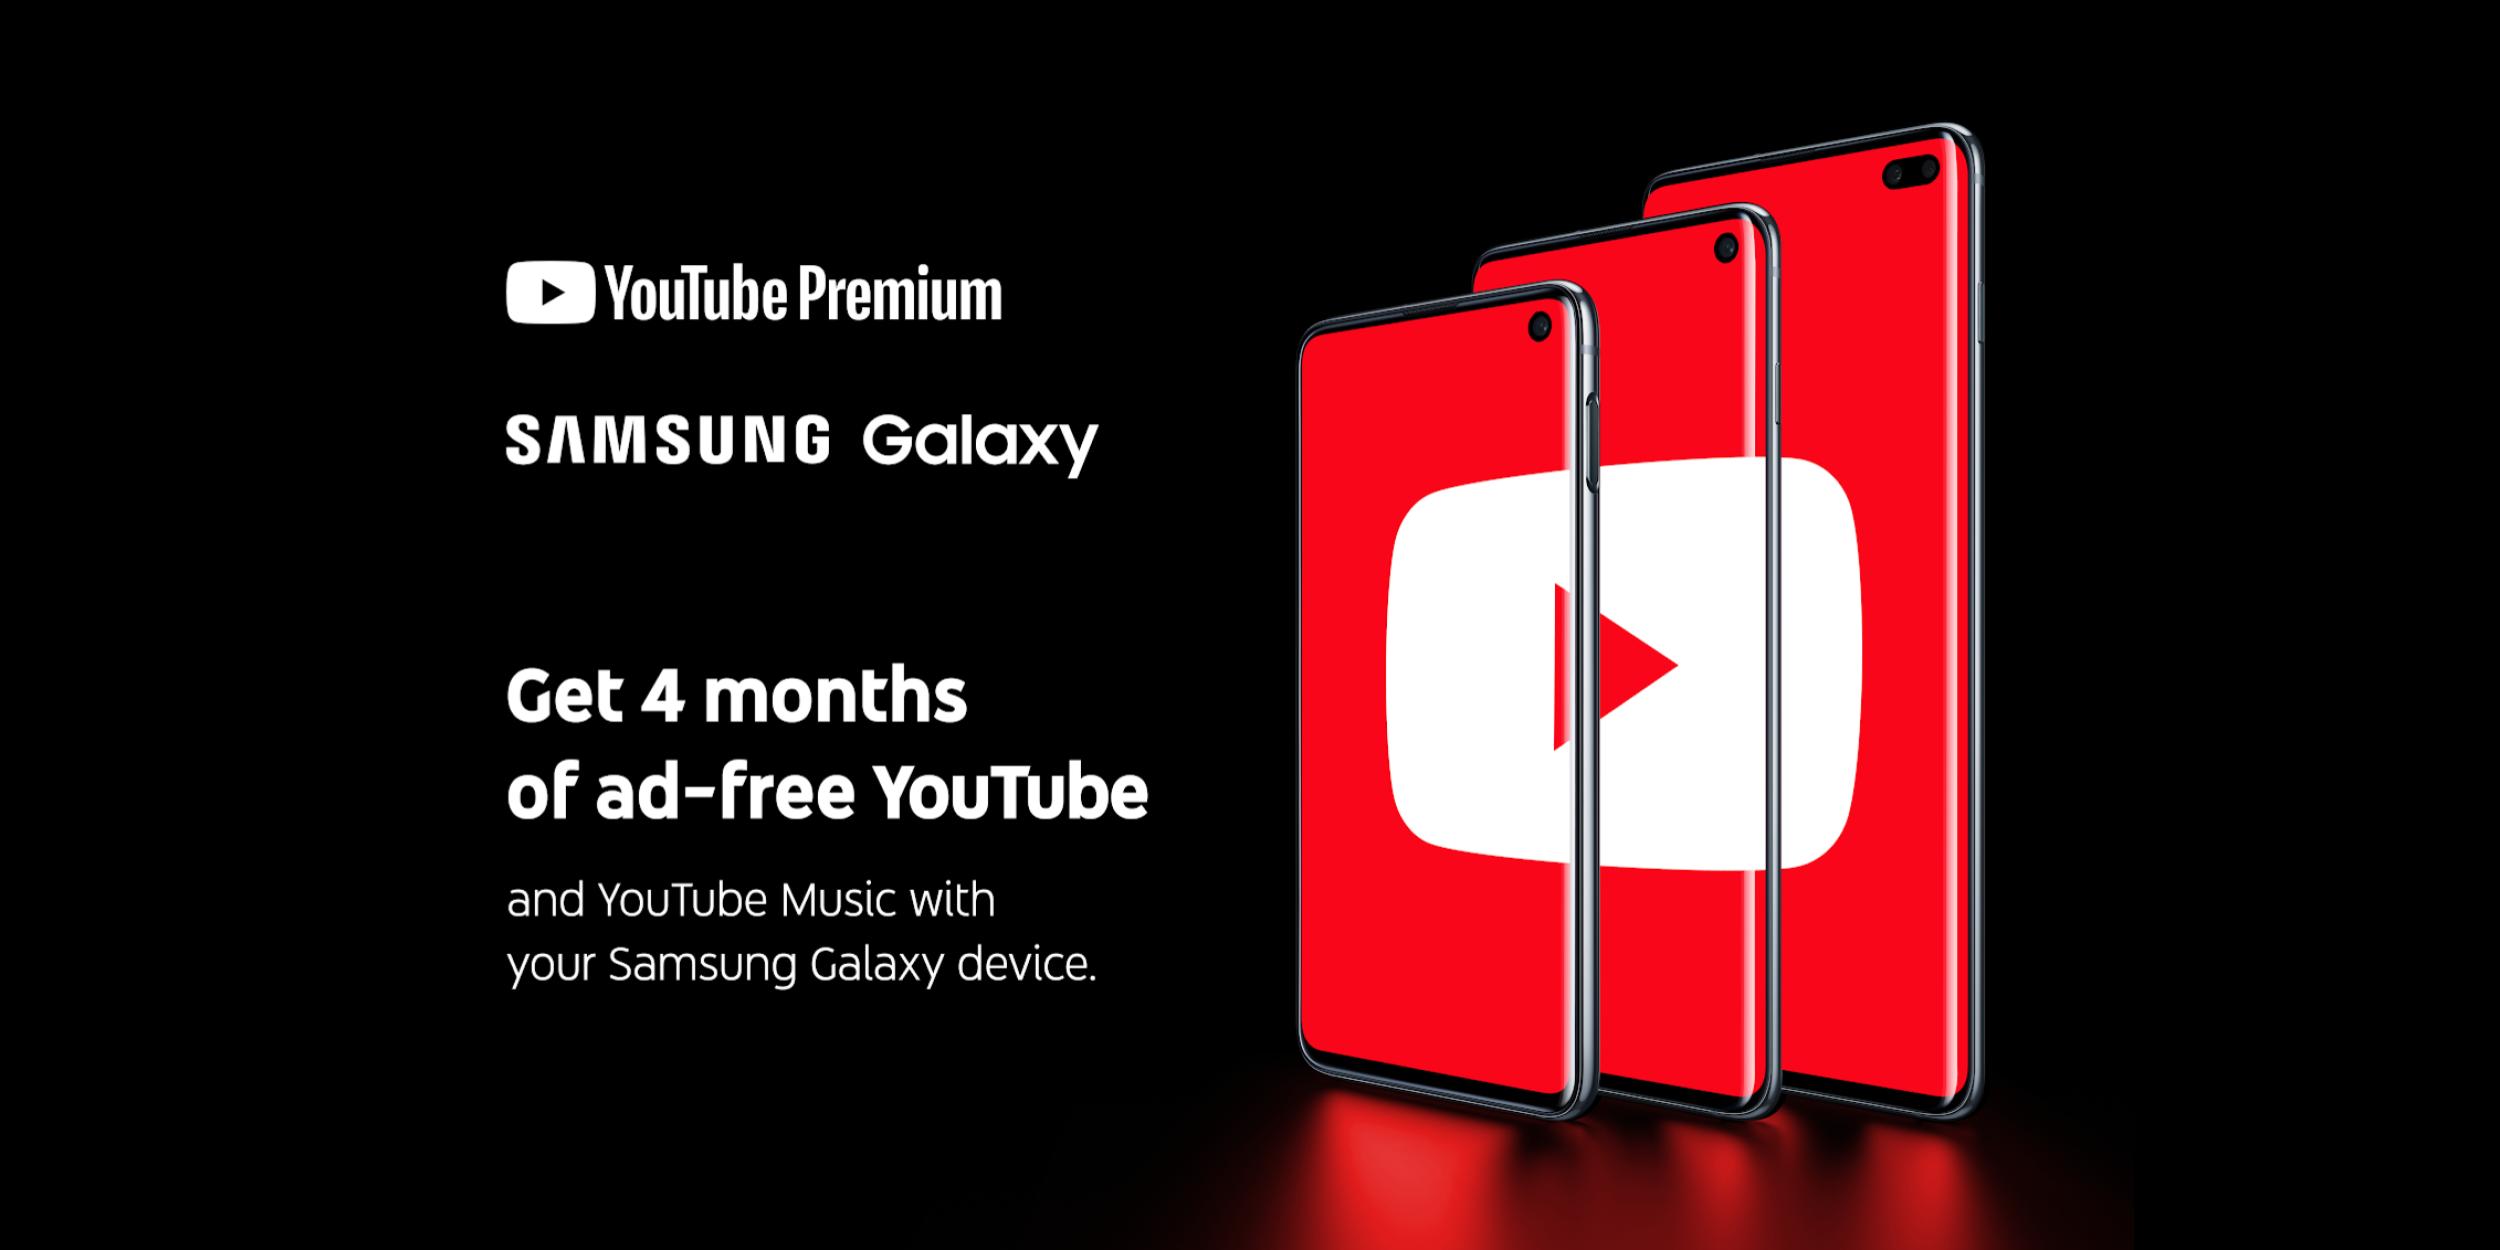 Galaxy S10 Owners Will Get 4 Months Of Youtube Premium 9to5google